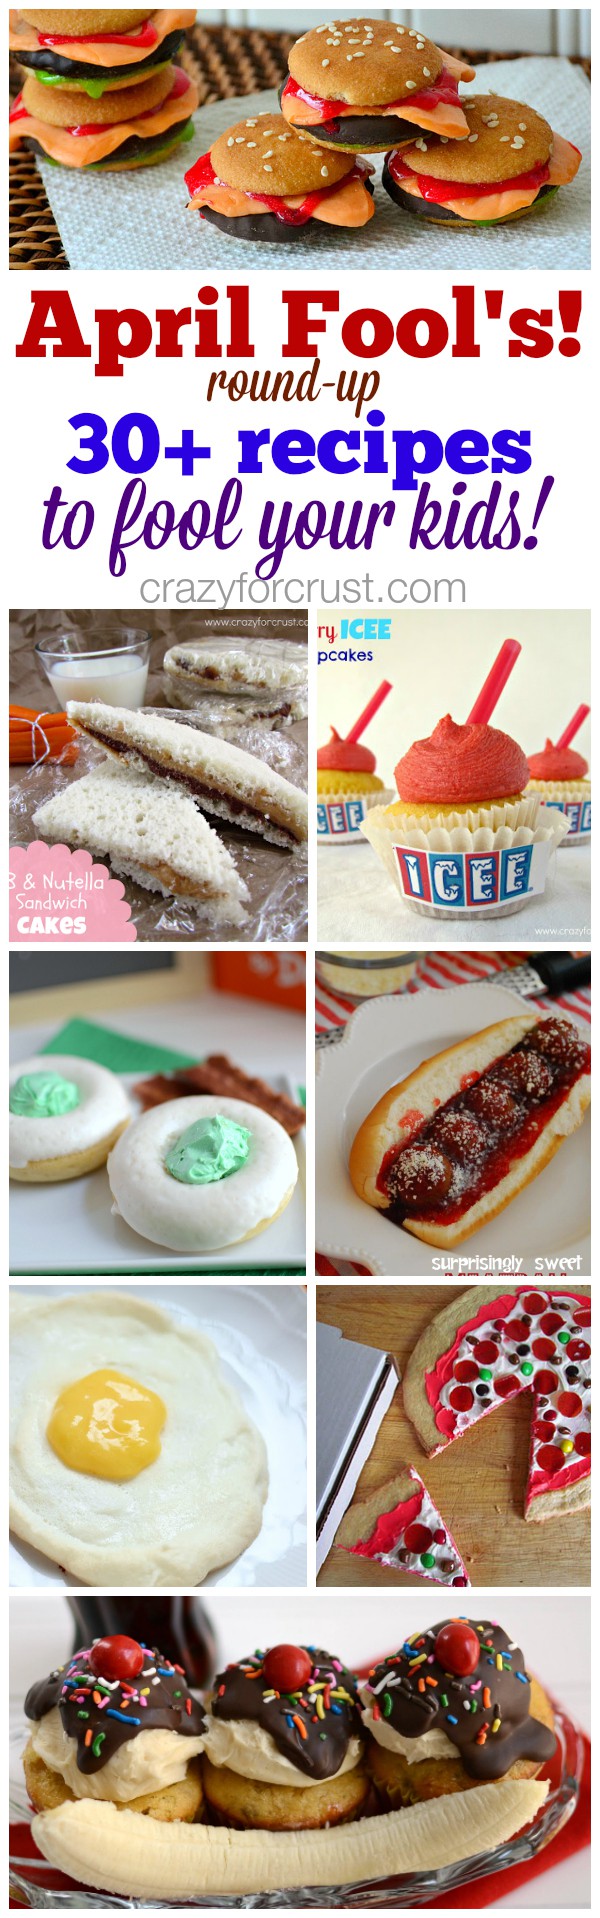 Over 30 april fool’s day recipes to fool your kids!